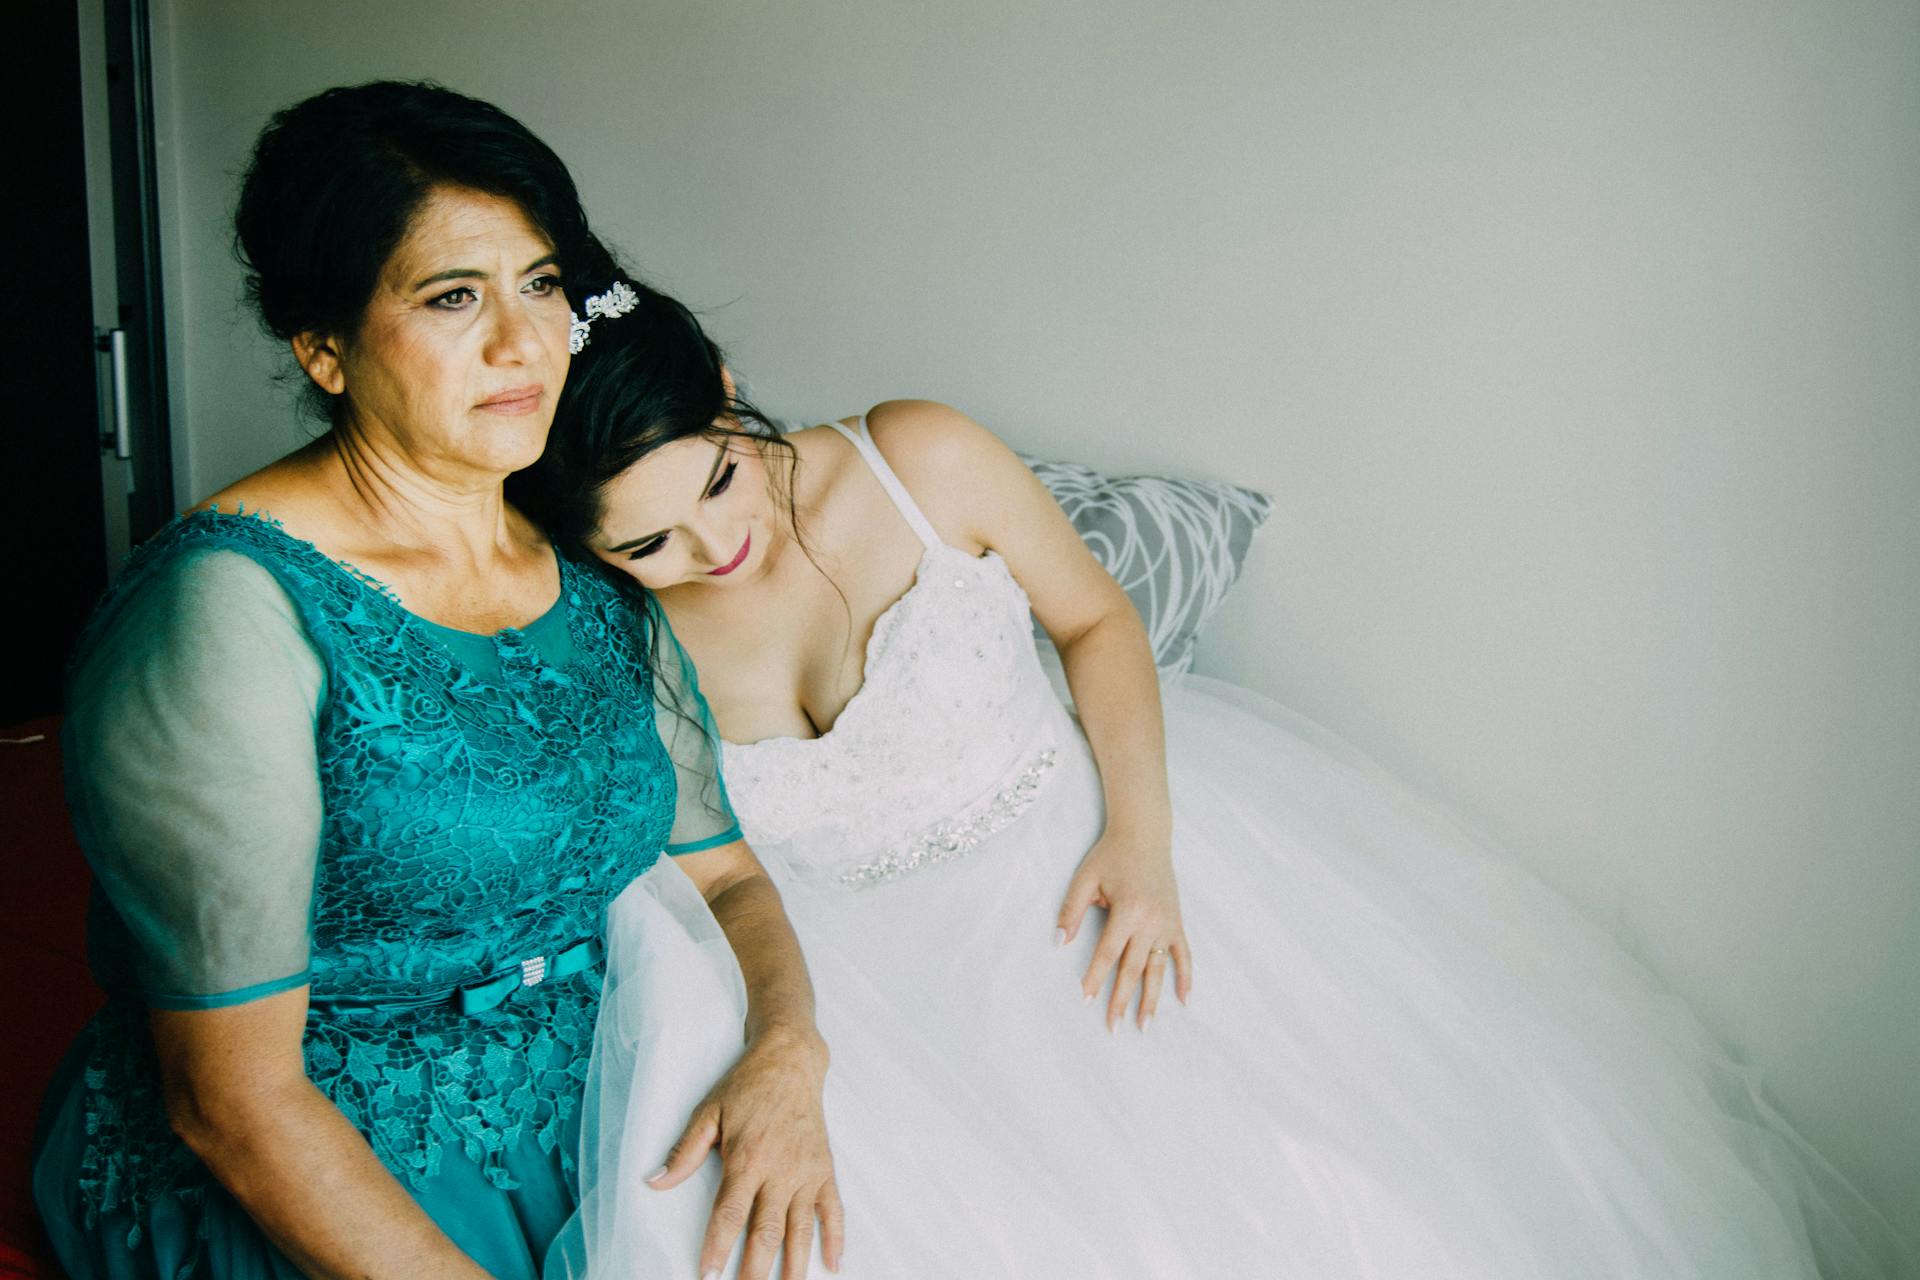 A bride leaning on a woman | Source: Pexels